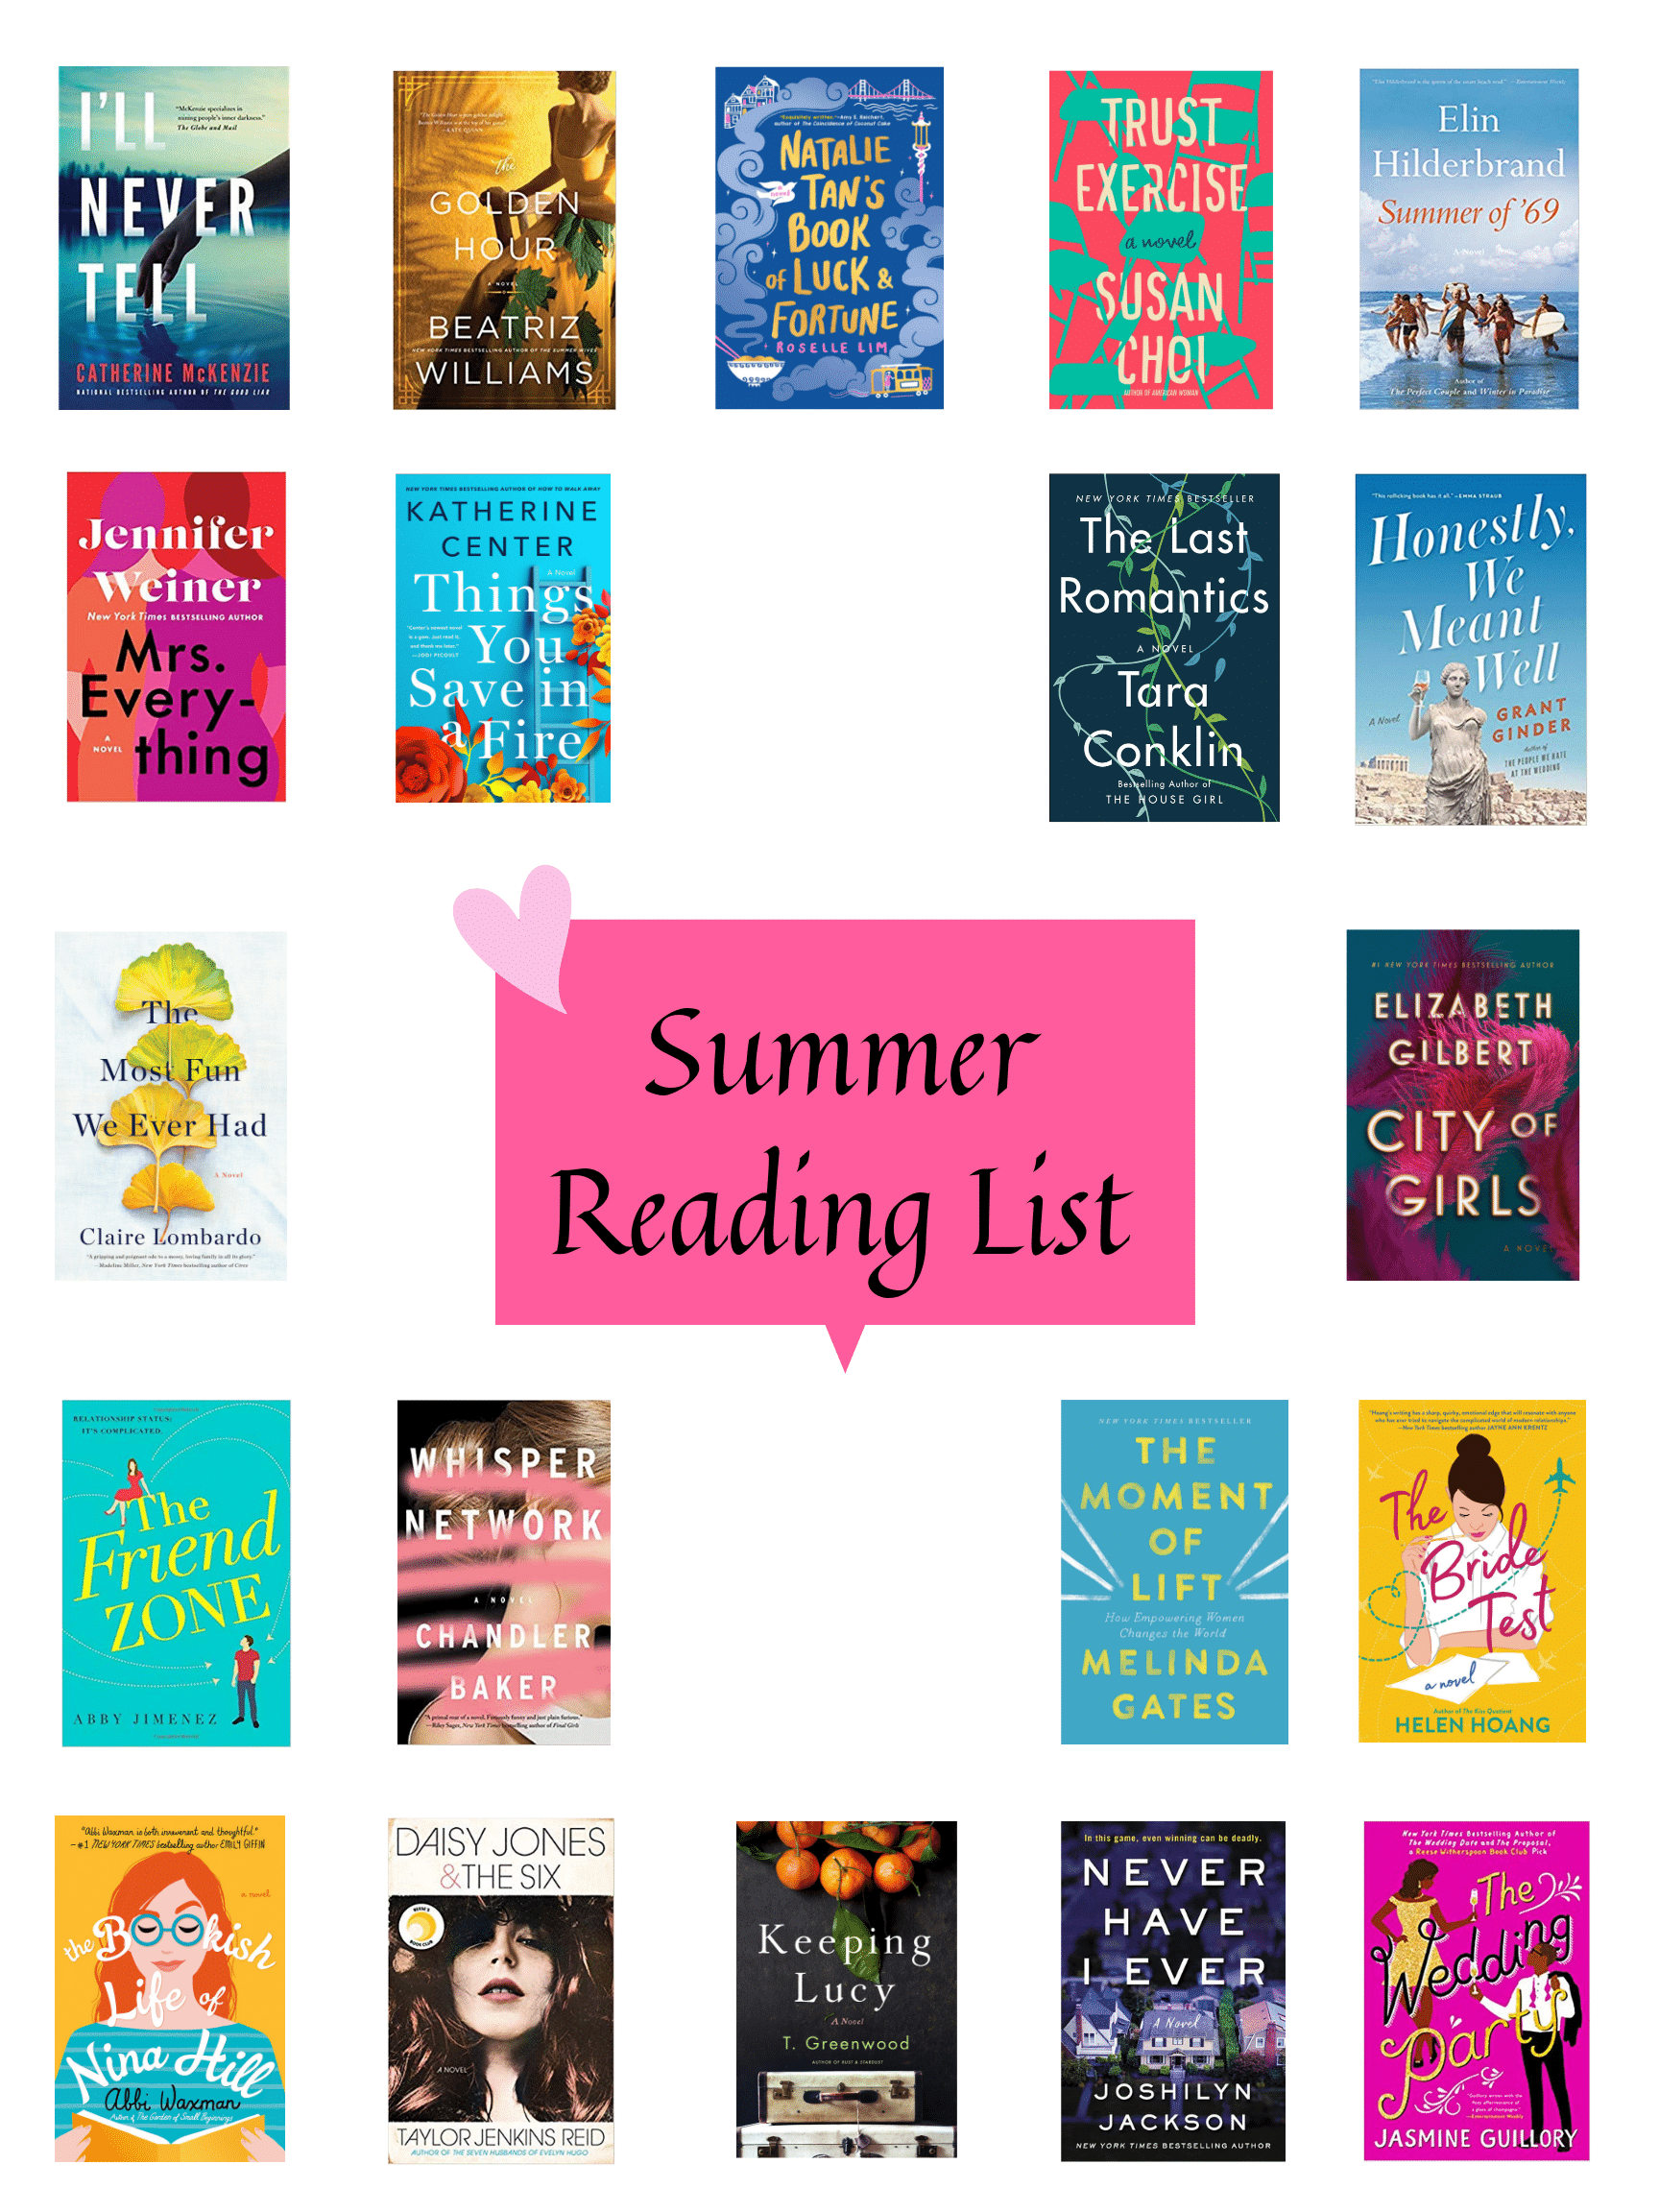 My summer 2019 reading list is here! It's chock full of 25 books that I can't wait to read this season! Can't wait to hear your suggestions too!